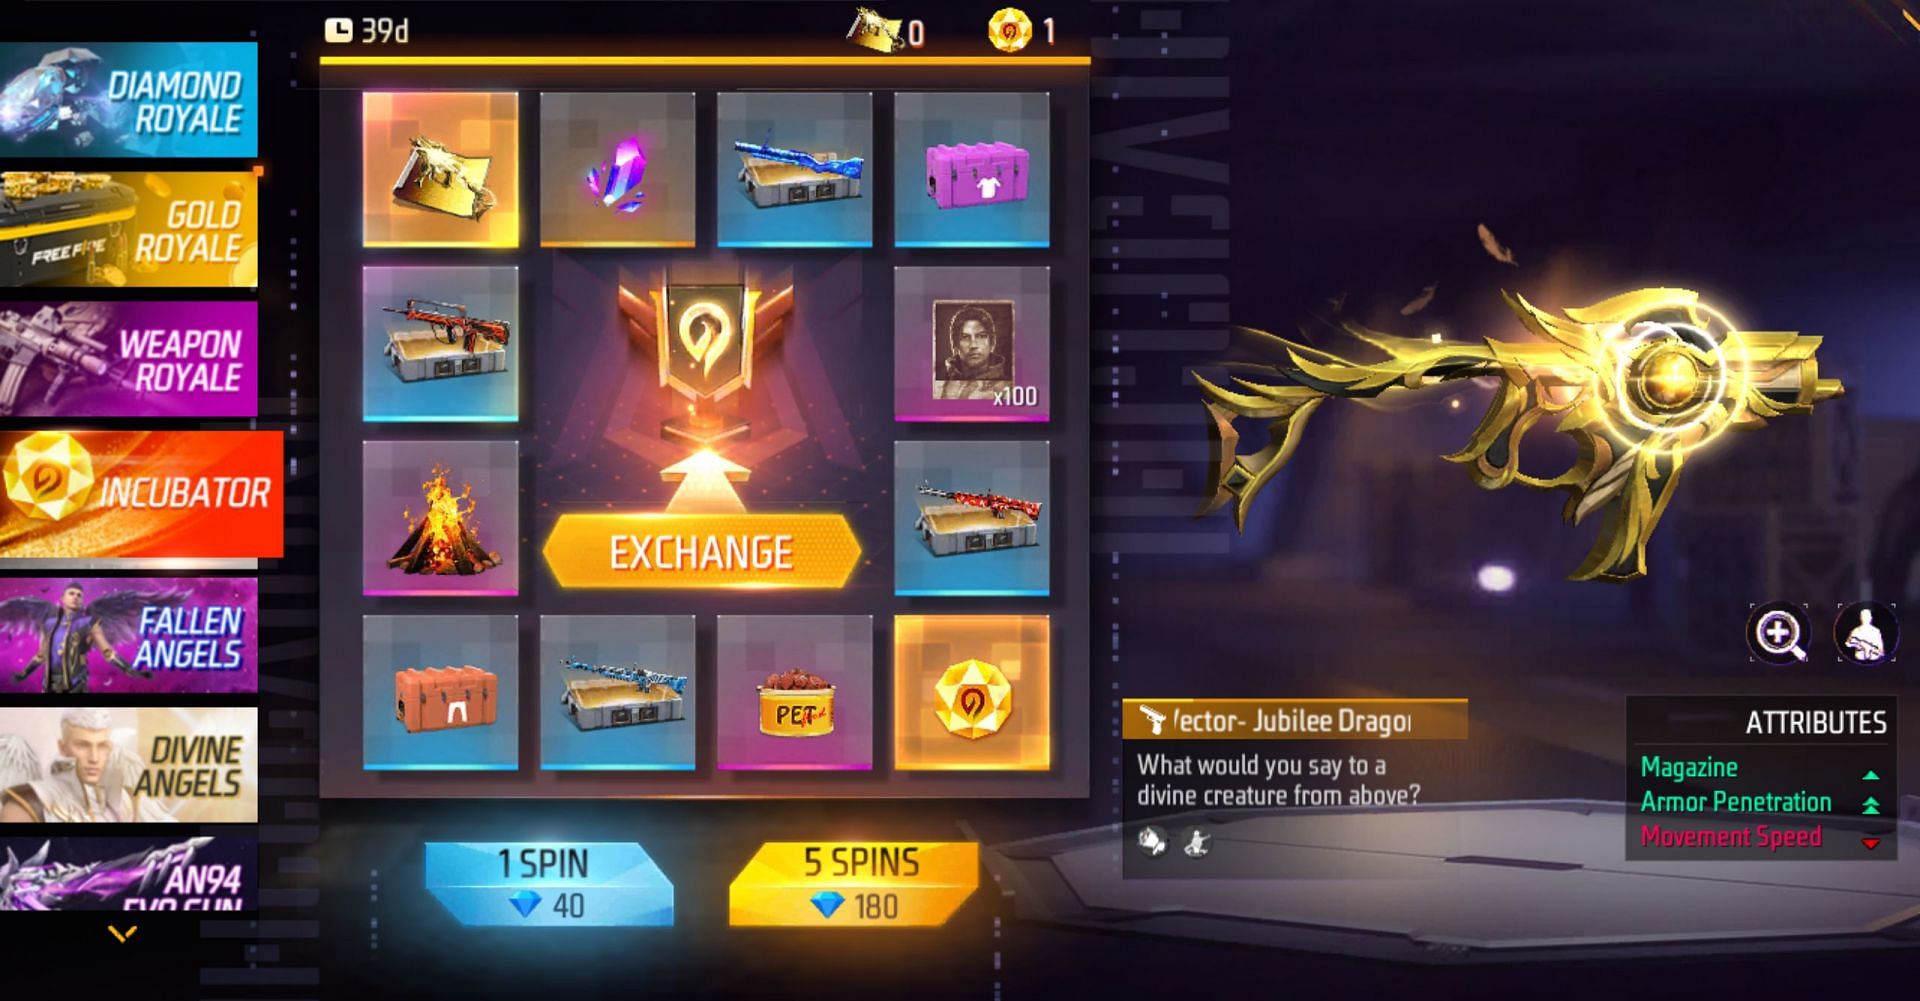 There are a total of 12 items available in the Incubator (Image via Garena)